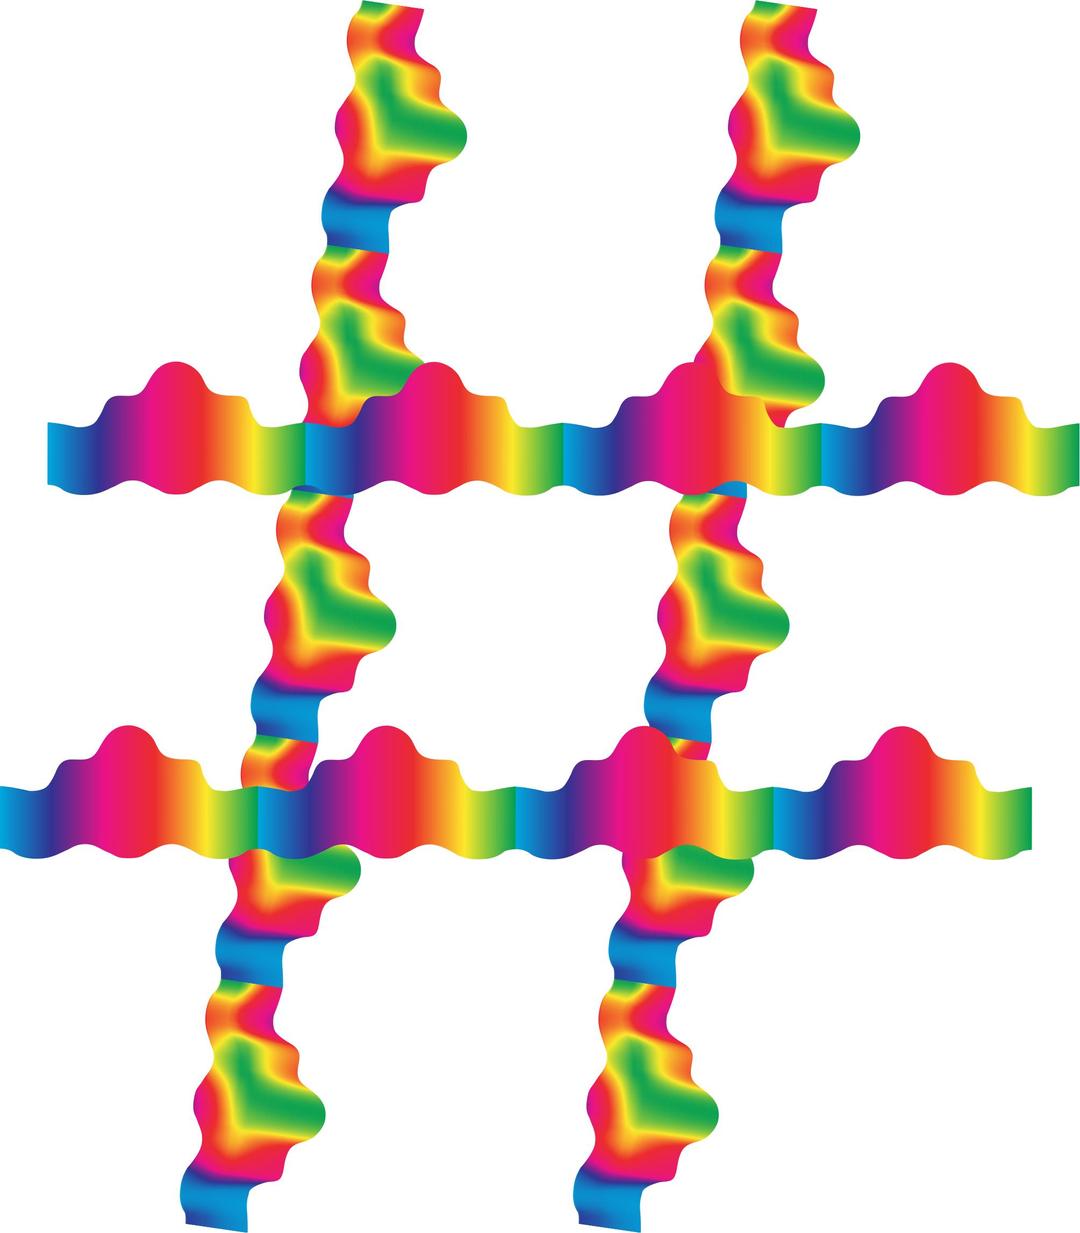 Rainbow Guilloche Hashtag 2 No Background png transparent